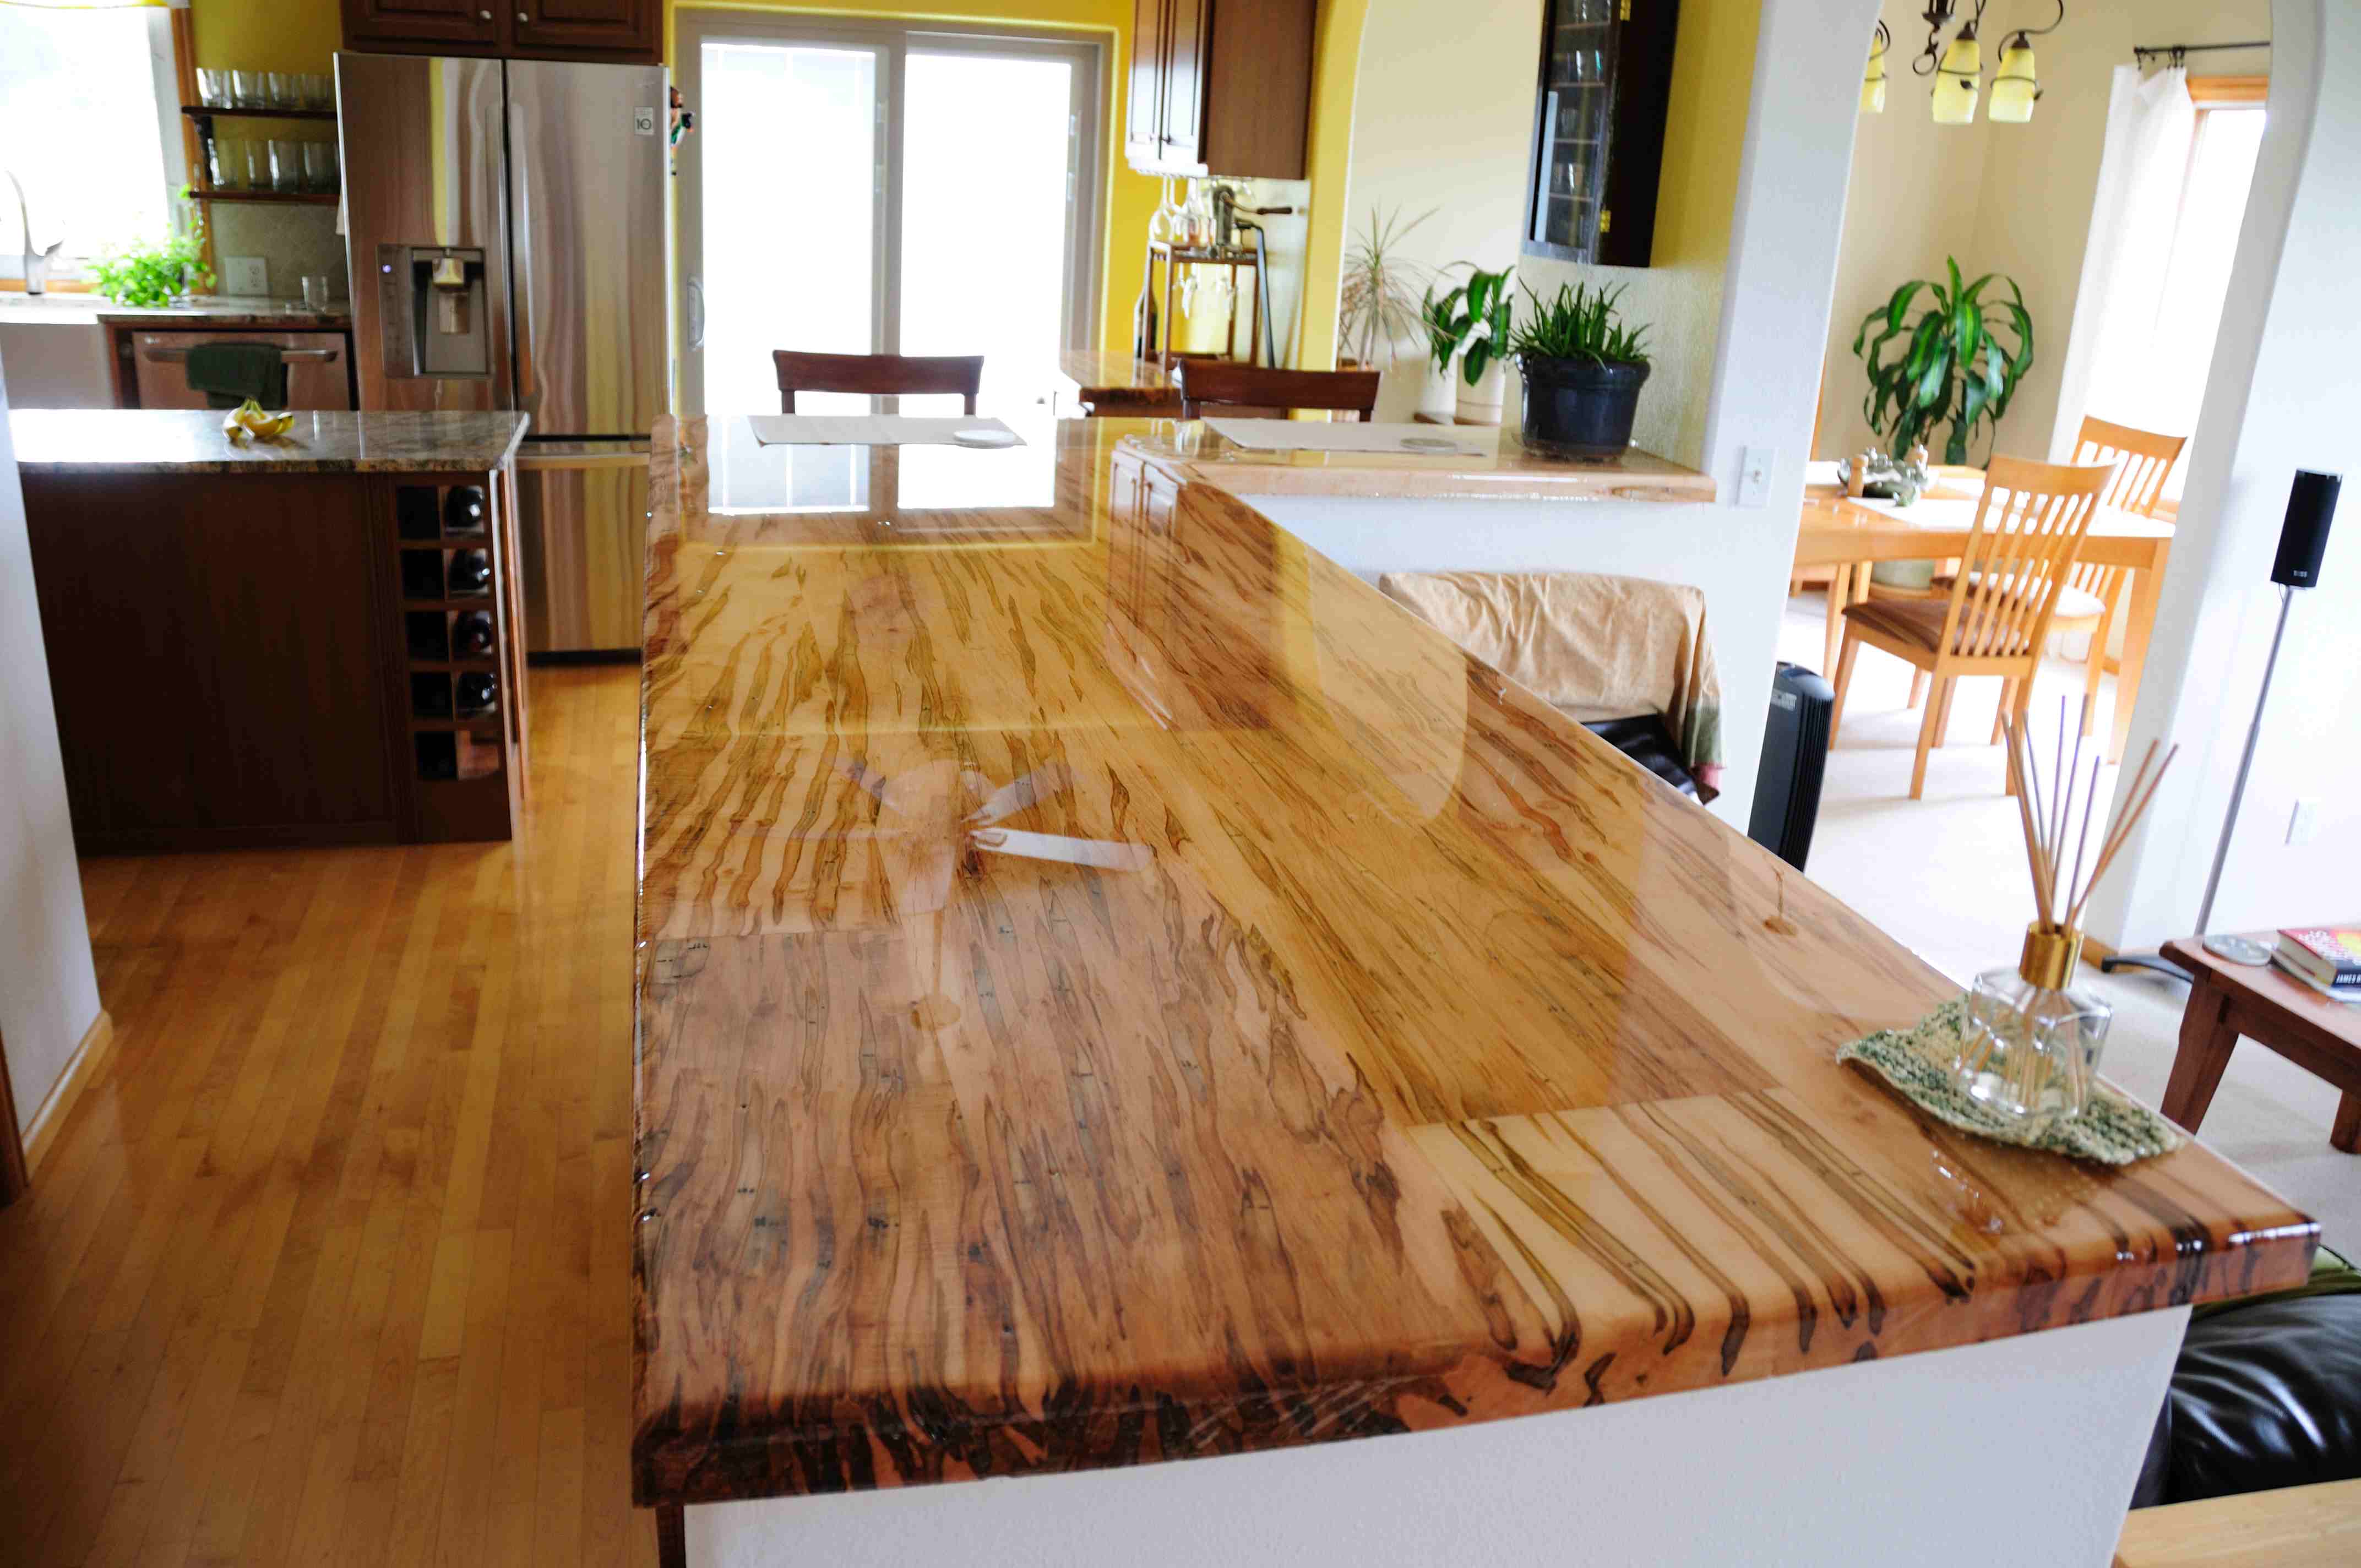 Epoxy Resin for Bar Tops, Tables, & Countertops  Diy wood projects  furniture, Wood projects, Wood art projects